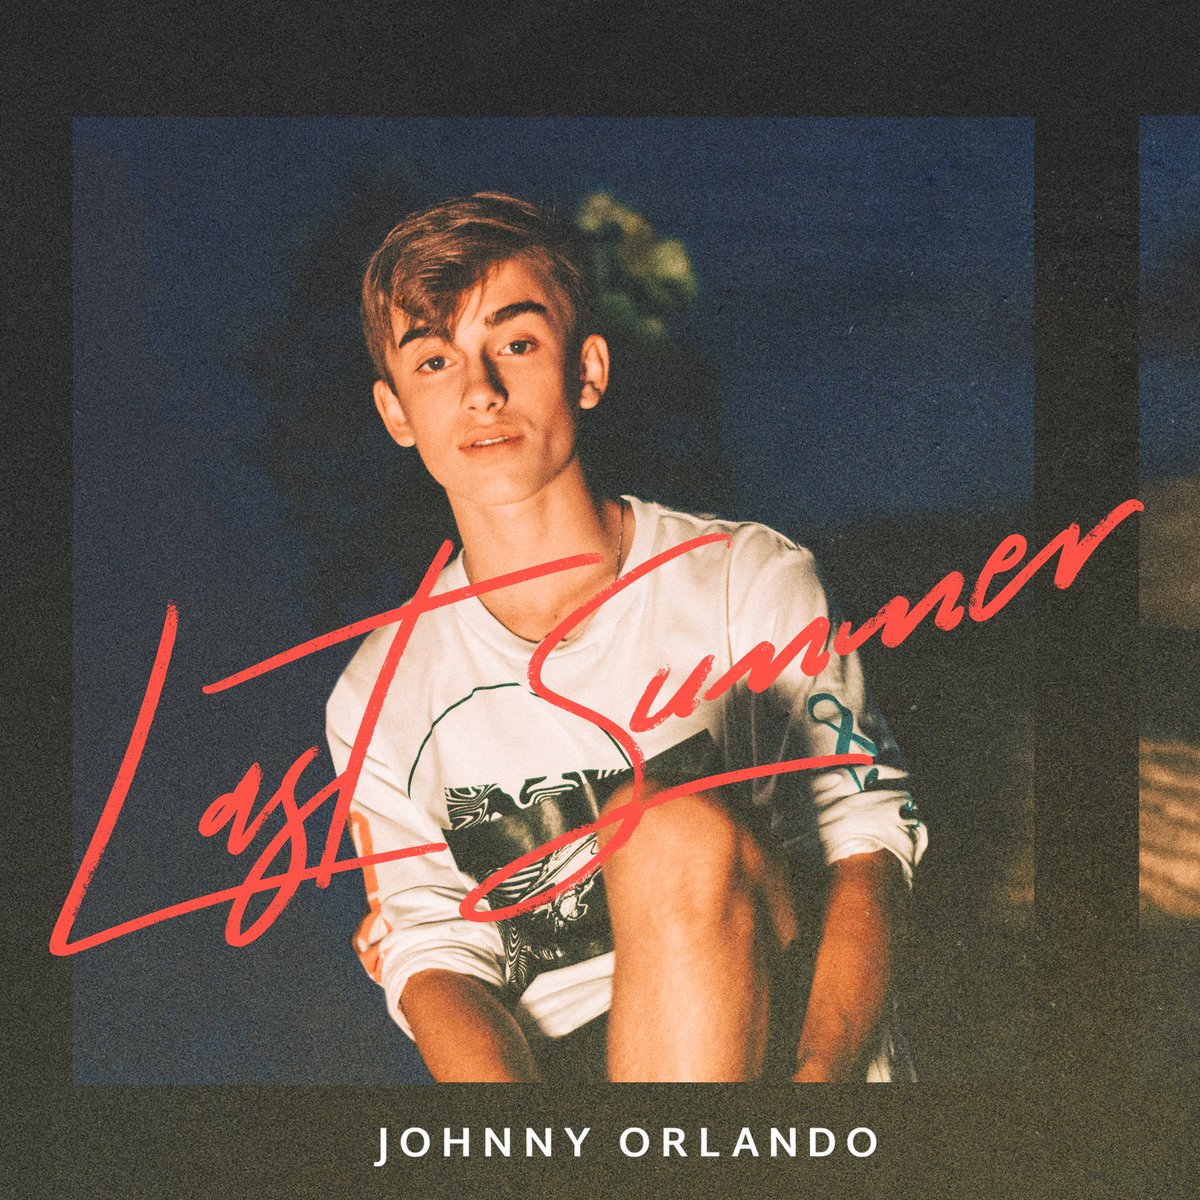 it’s finally here. my new single #LastSummer is available for pre-save right now!! The song officially drops SEPTEMBER 19th!! been waiting for so long to share this with you guys. everyone who pre-saves will be entered to win a skype call w me! pre save: johnnyorlando.lnk.to/site